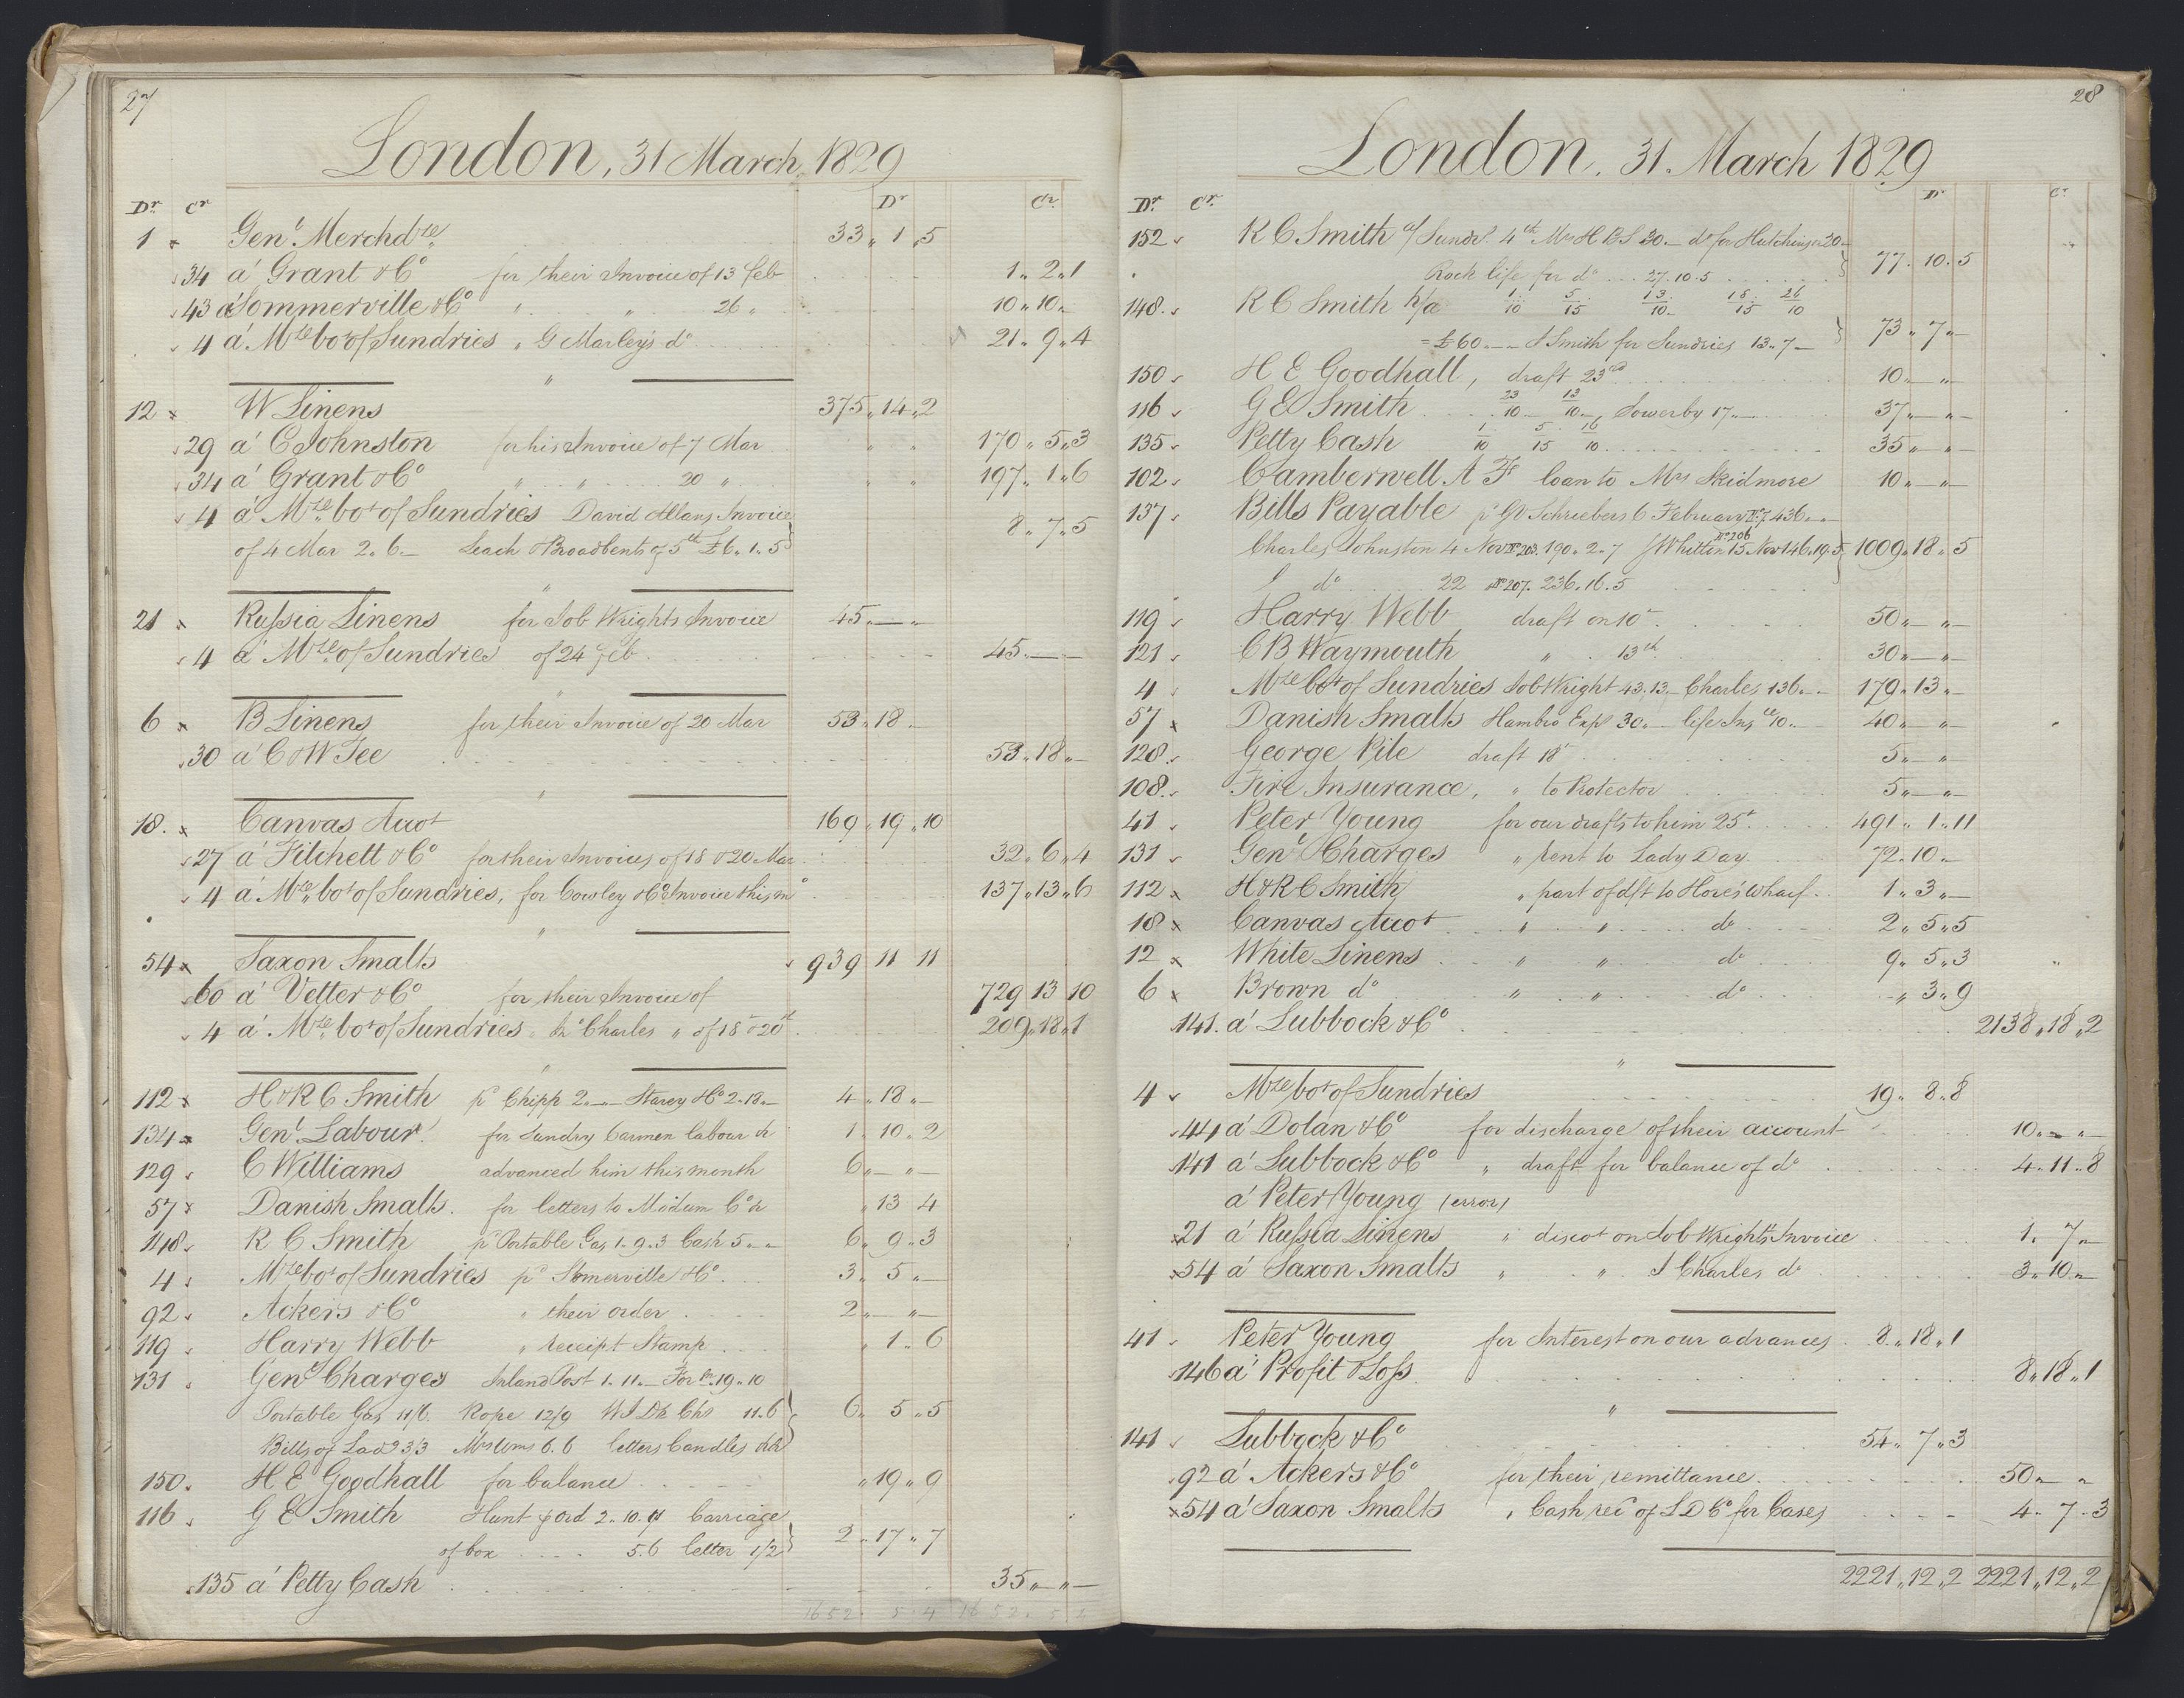 Smith, Goodhall & Reeves, RA/PA-0586/R/L0001: Dagbok (Daybook) A, 1829-1831, p. 27-28